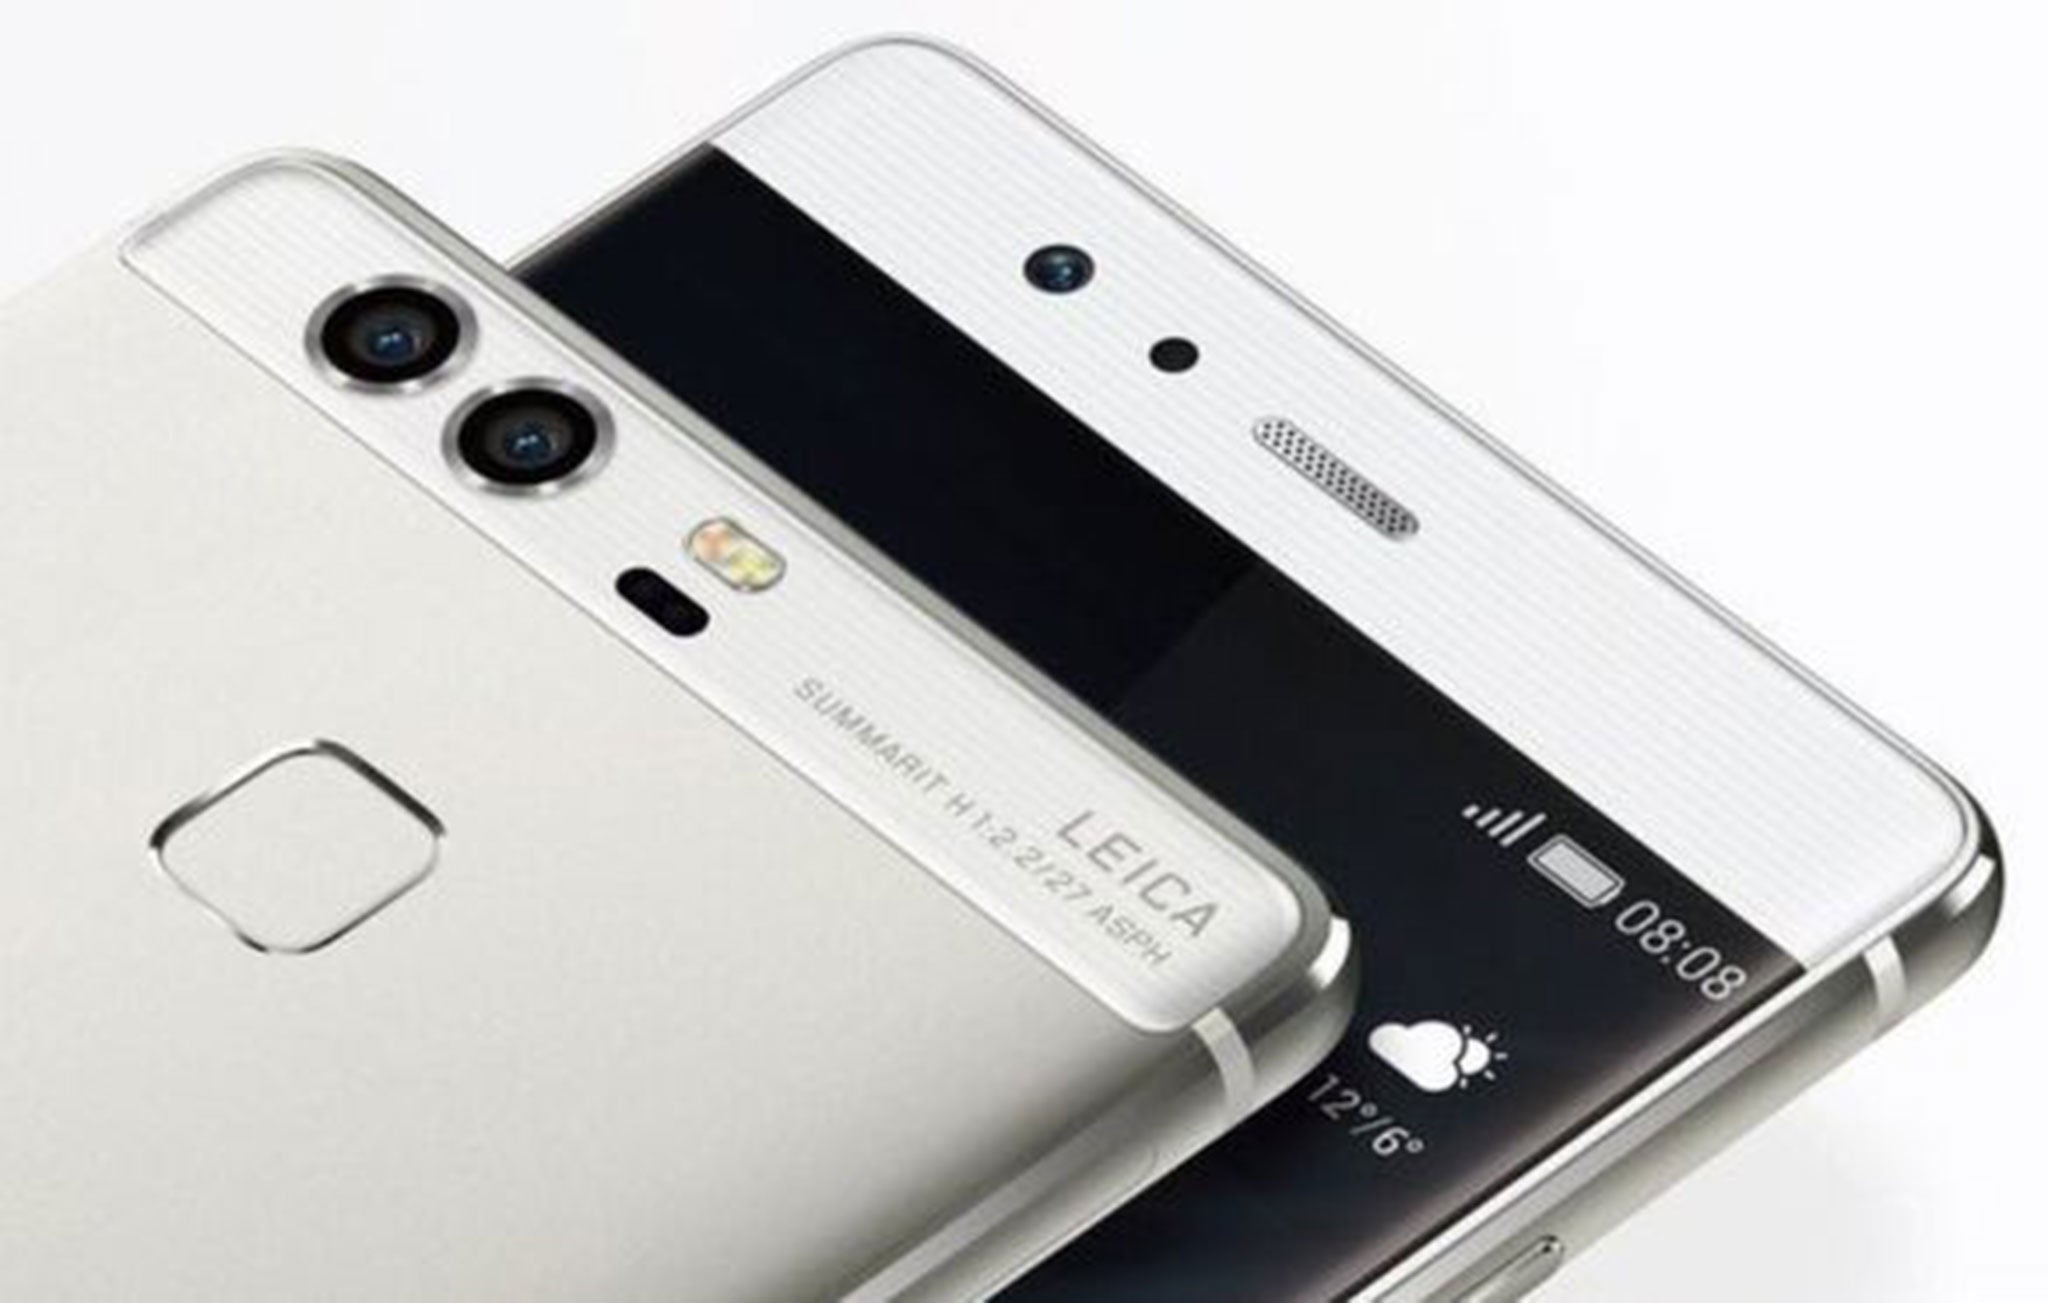 The Huawei P9 new phone has two cameras on the rear, to allow users to change the focus of pictures after they've been taken